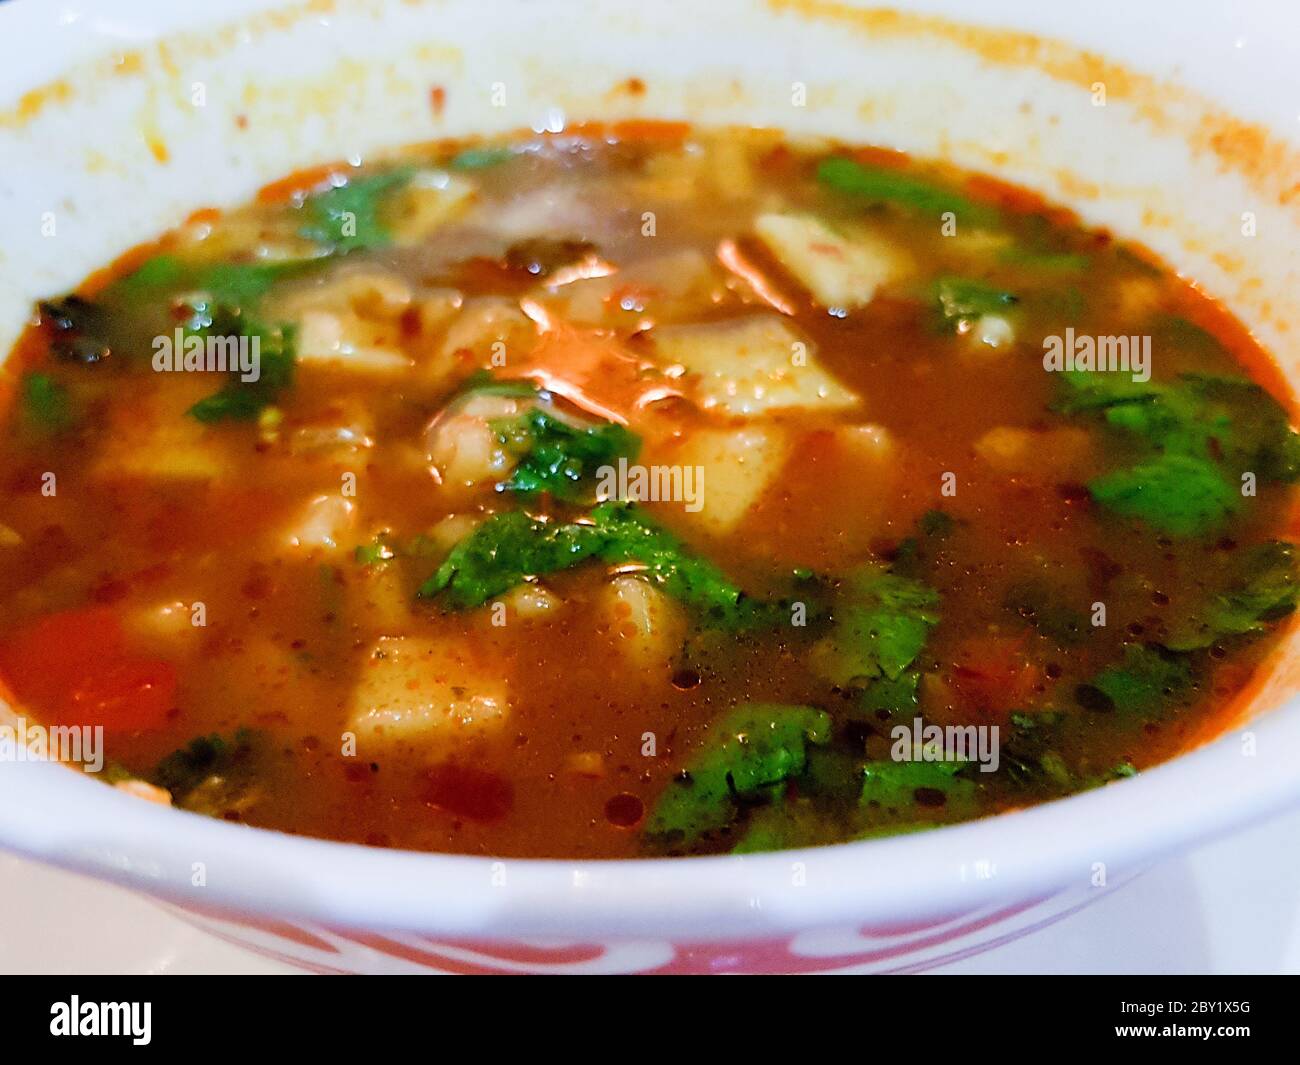 Close up photo of mampar, a popular Central Asian dish commonly attributed to Uighur cuisine. Stock Photo